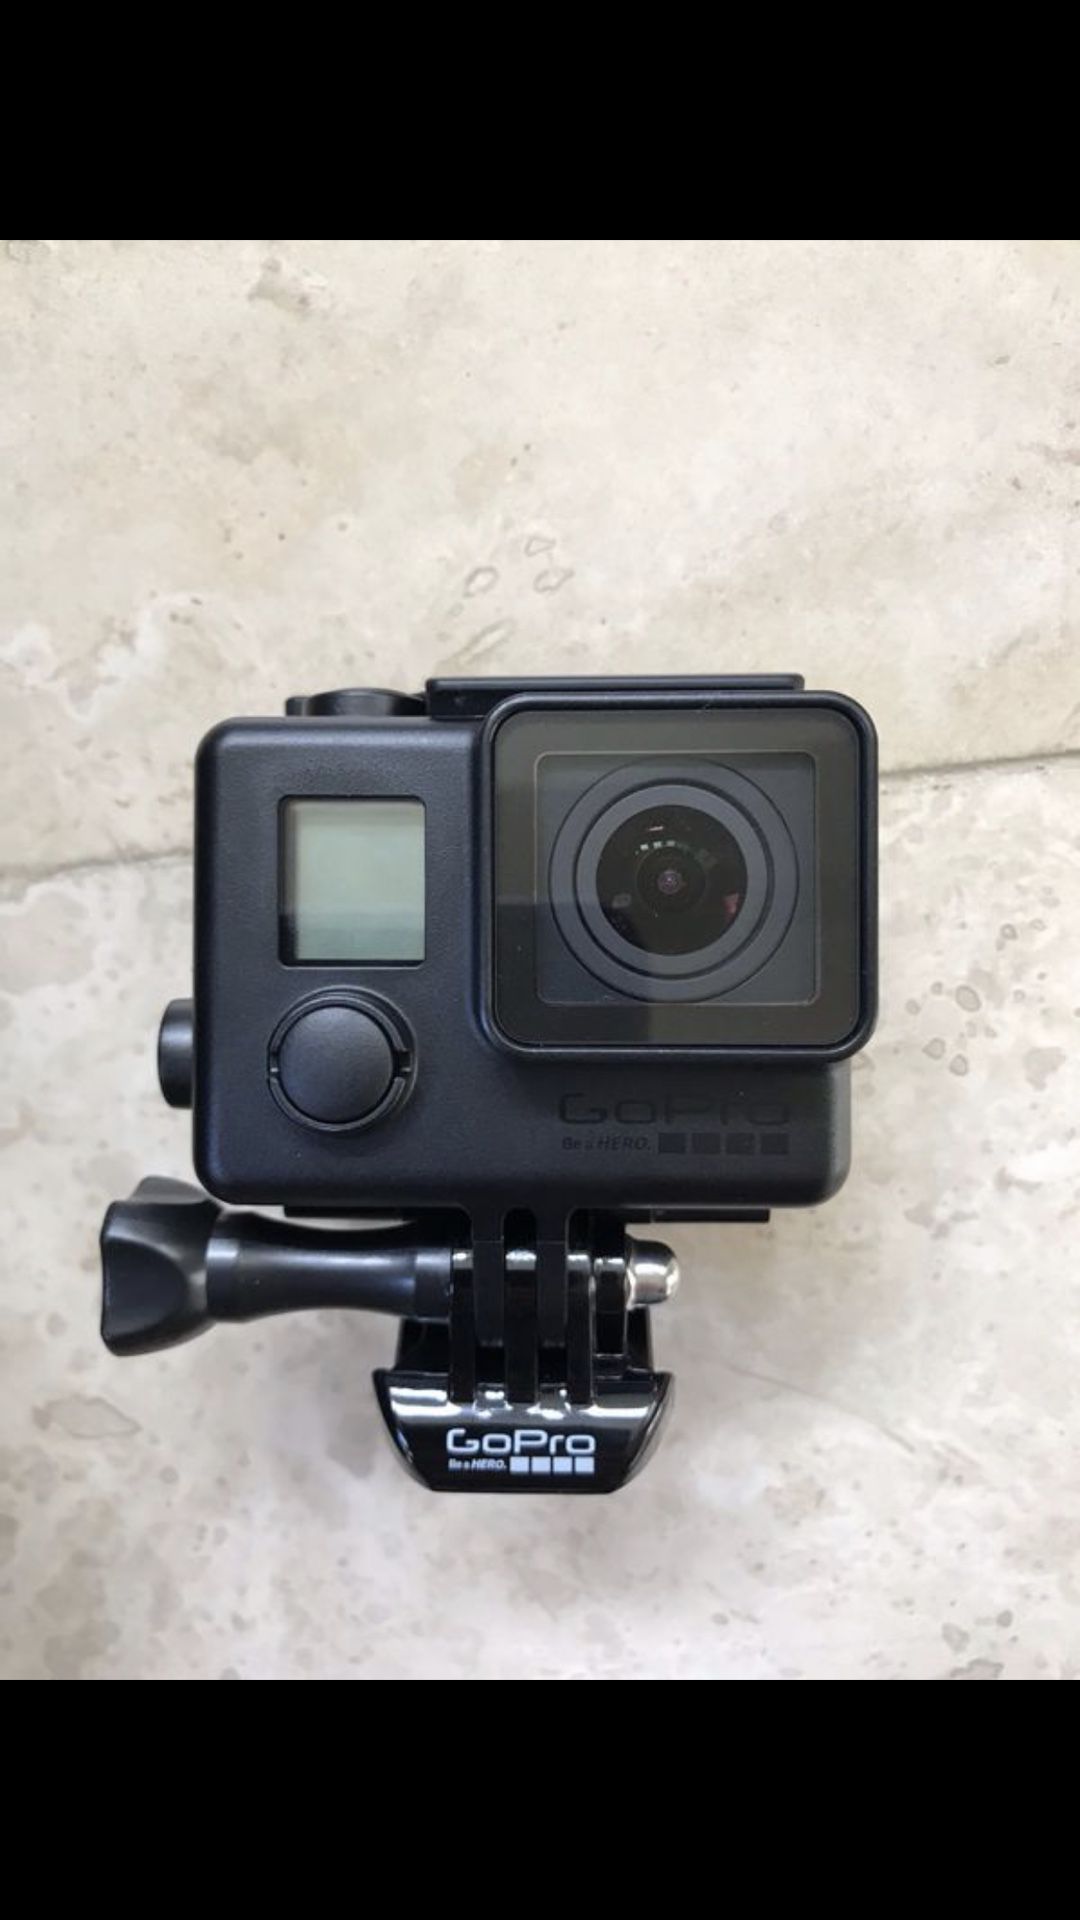 GoPro Hero 4 with Black Case (other accessories available)